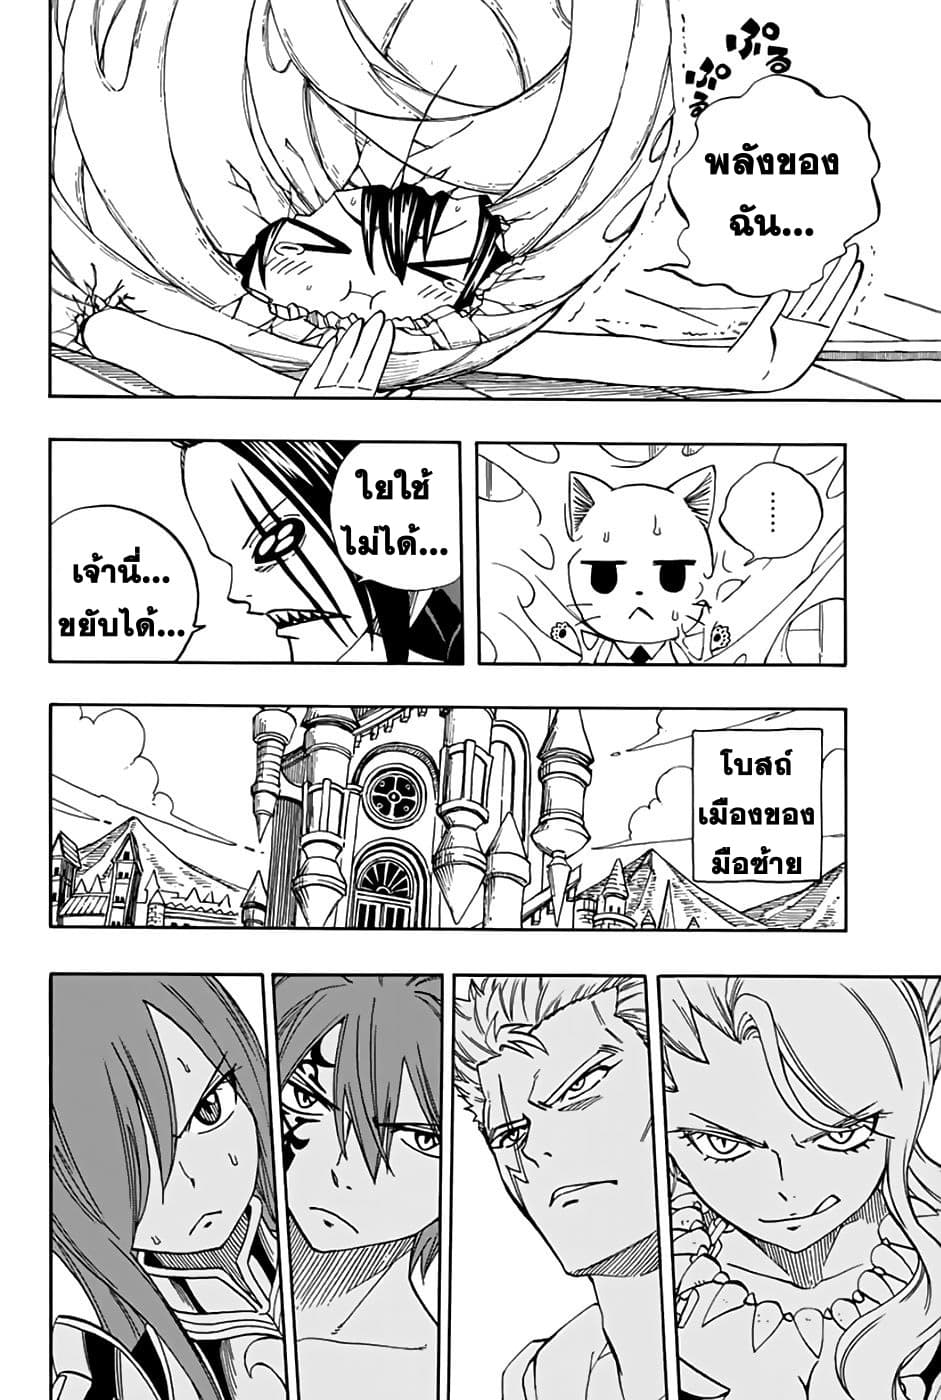 Fairy Tail: 100 Years Quest 35 TH